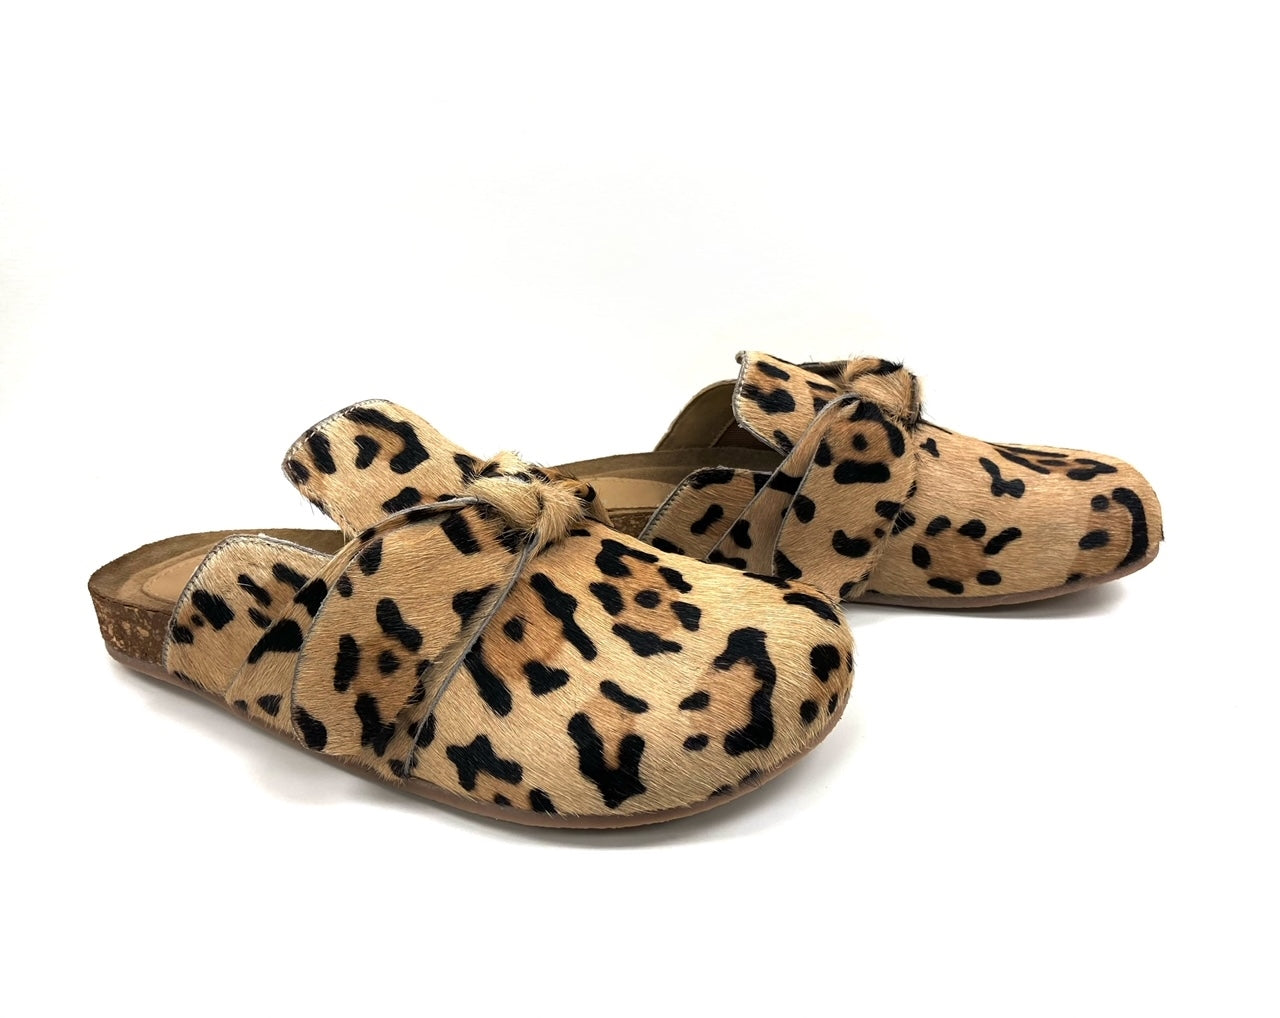 Pony Hair Slippers Print Cork Bed Clogs